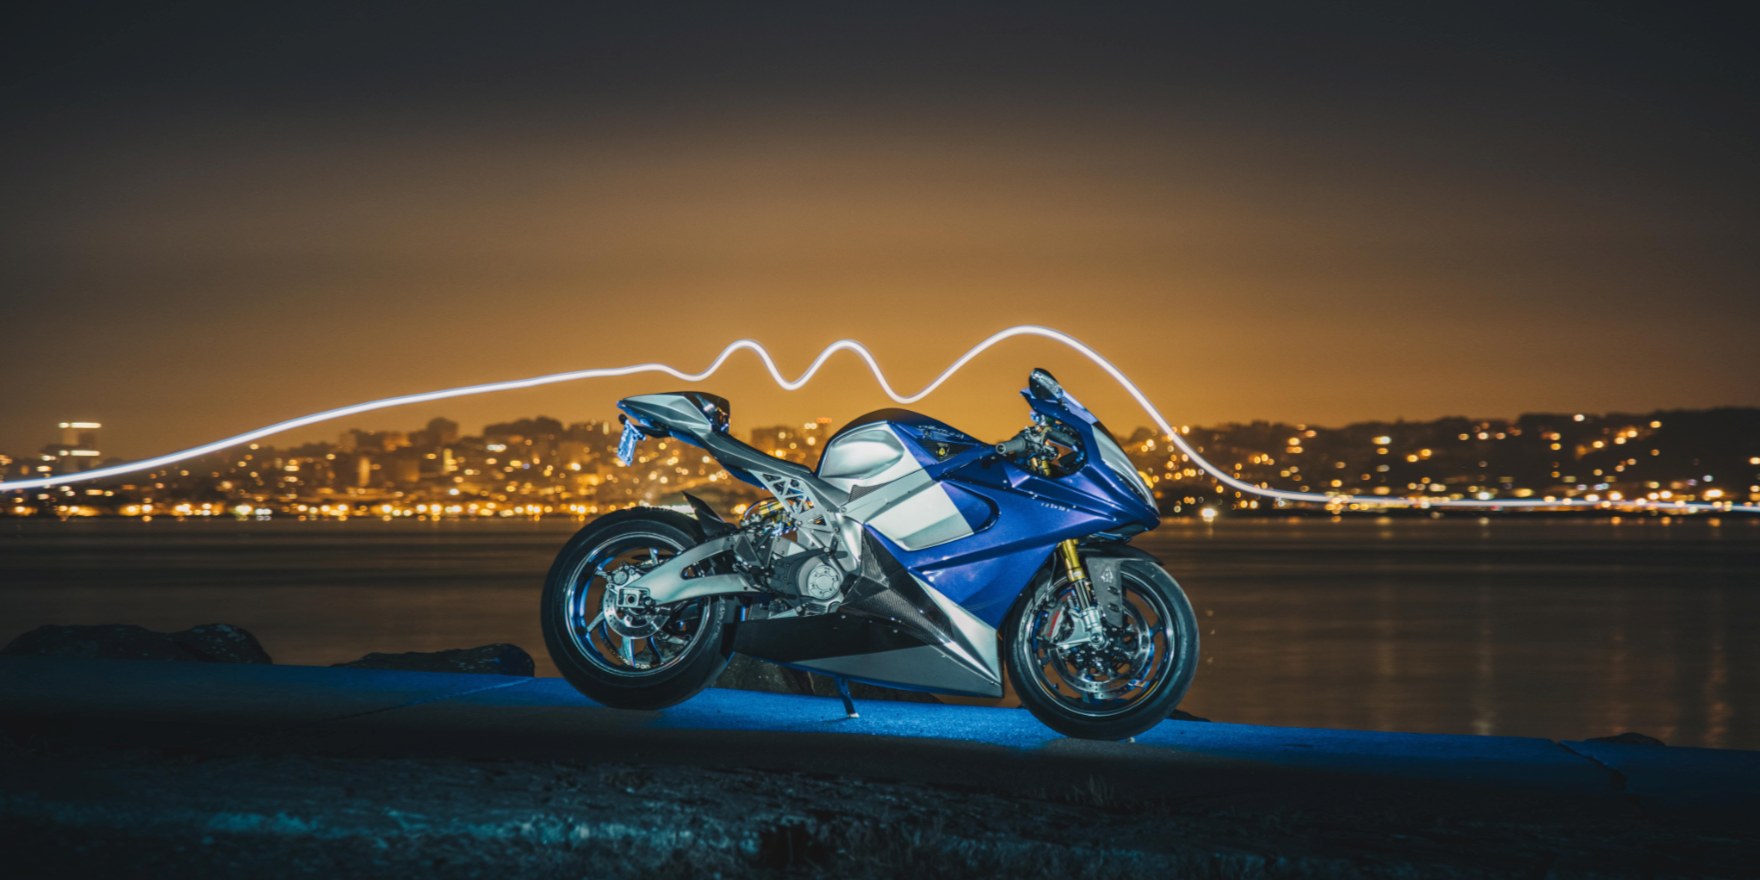 LS-218 electric motorcycle accelerates from 100-150 mph in 2 seconds